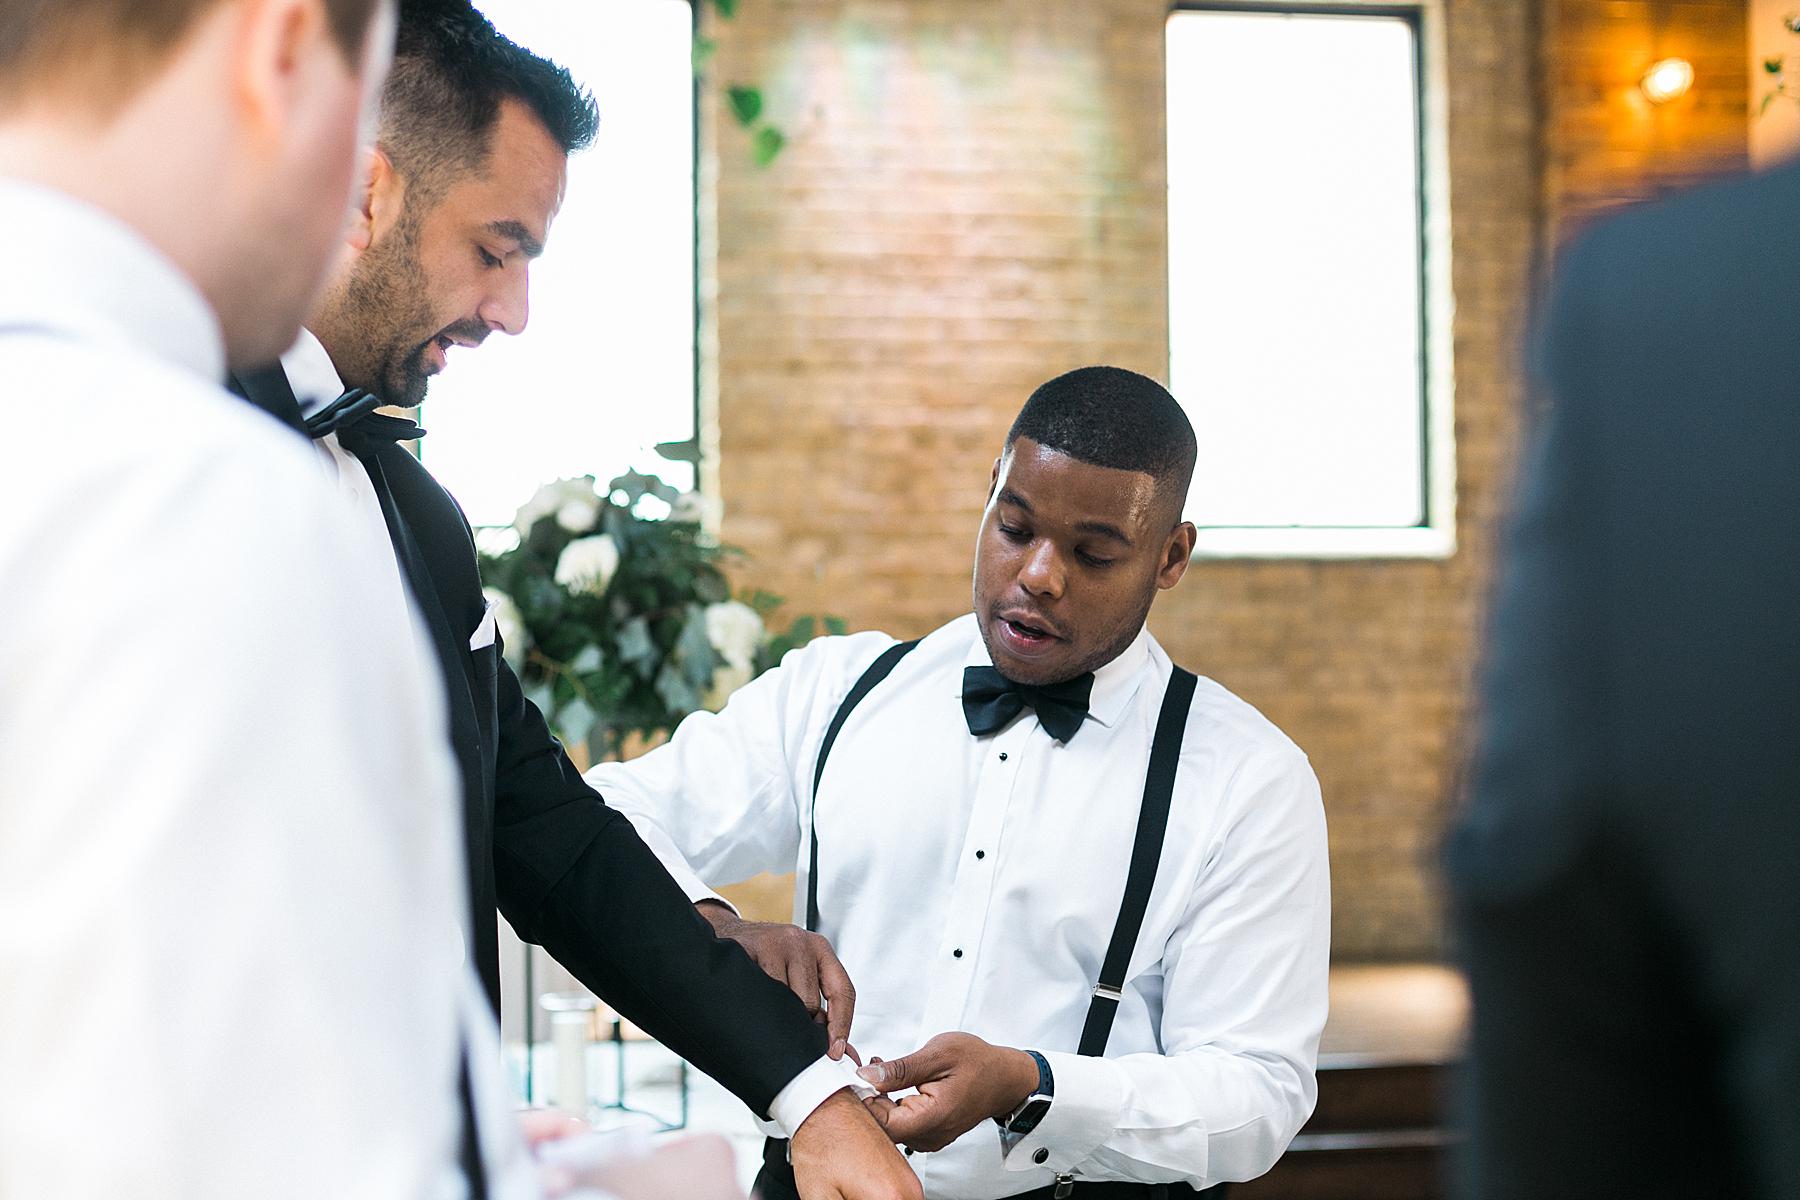 groom and groomsmen getting ready on wedding day at ivy house, milwaukee